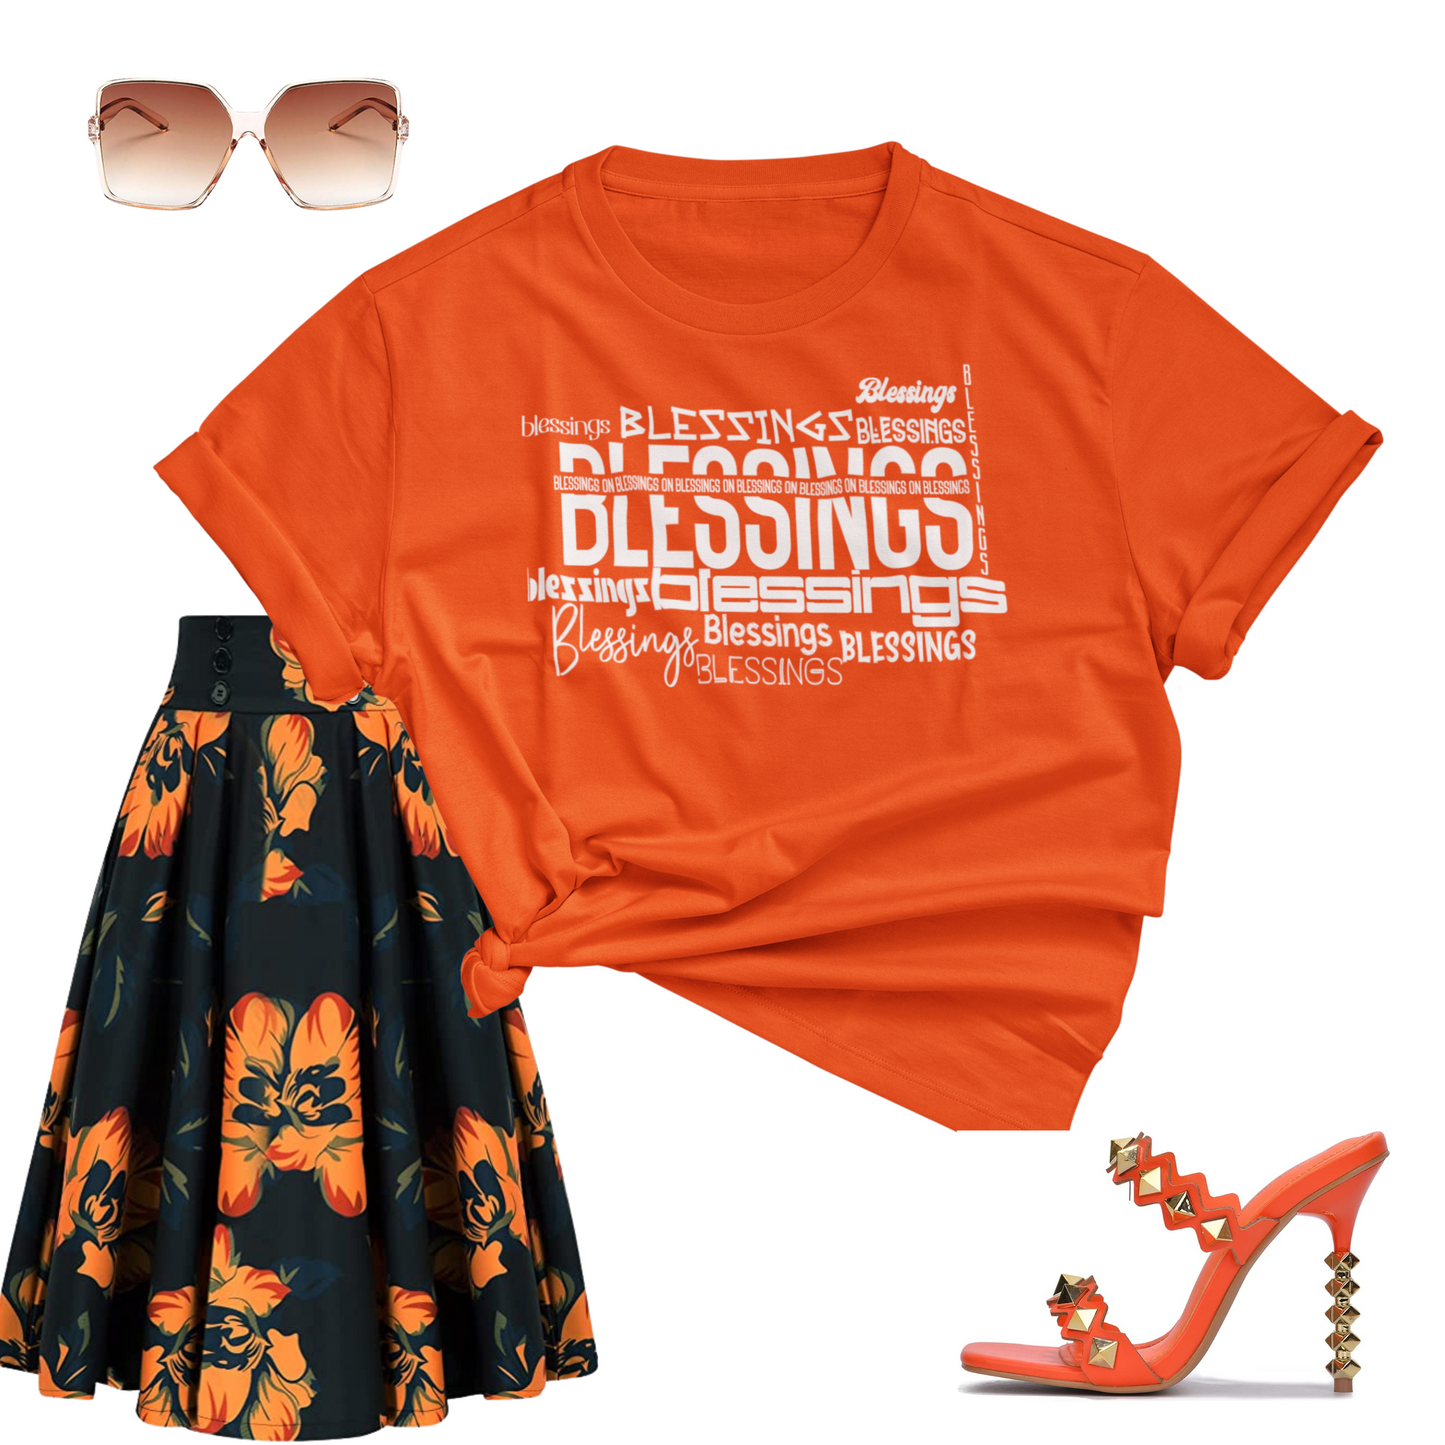 Vibrant orange 'Blessings on Blessings' T-shirt from Triumph Tees. Show off your faith with this stylish and comfortable shirt that's perfect for any casual occasion.